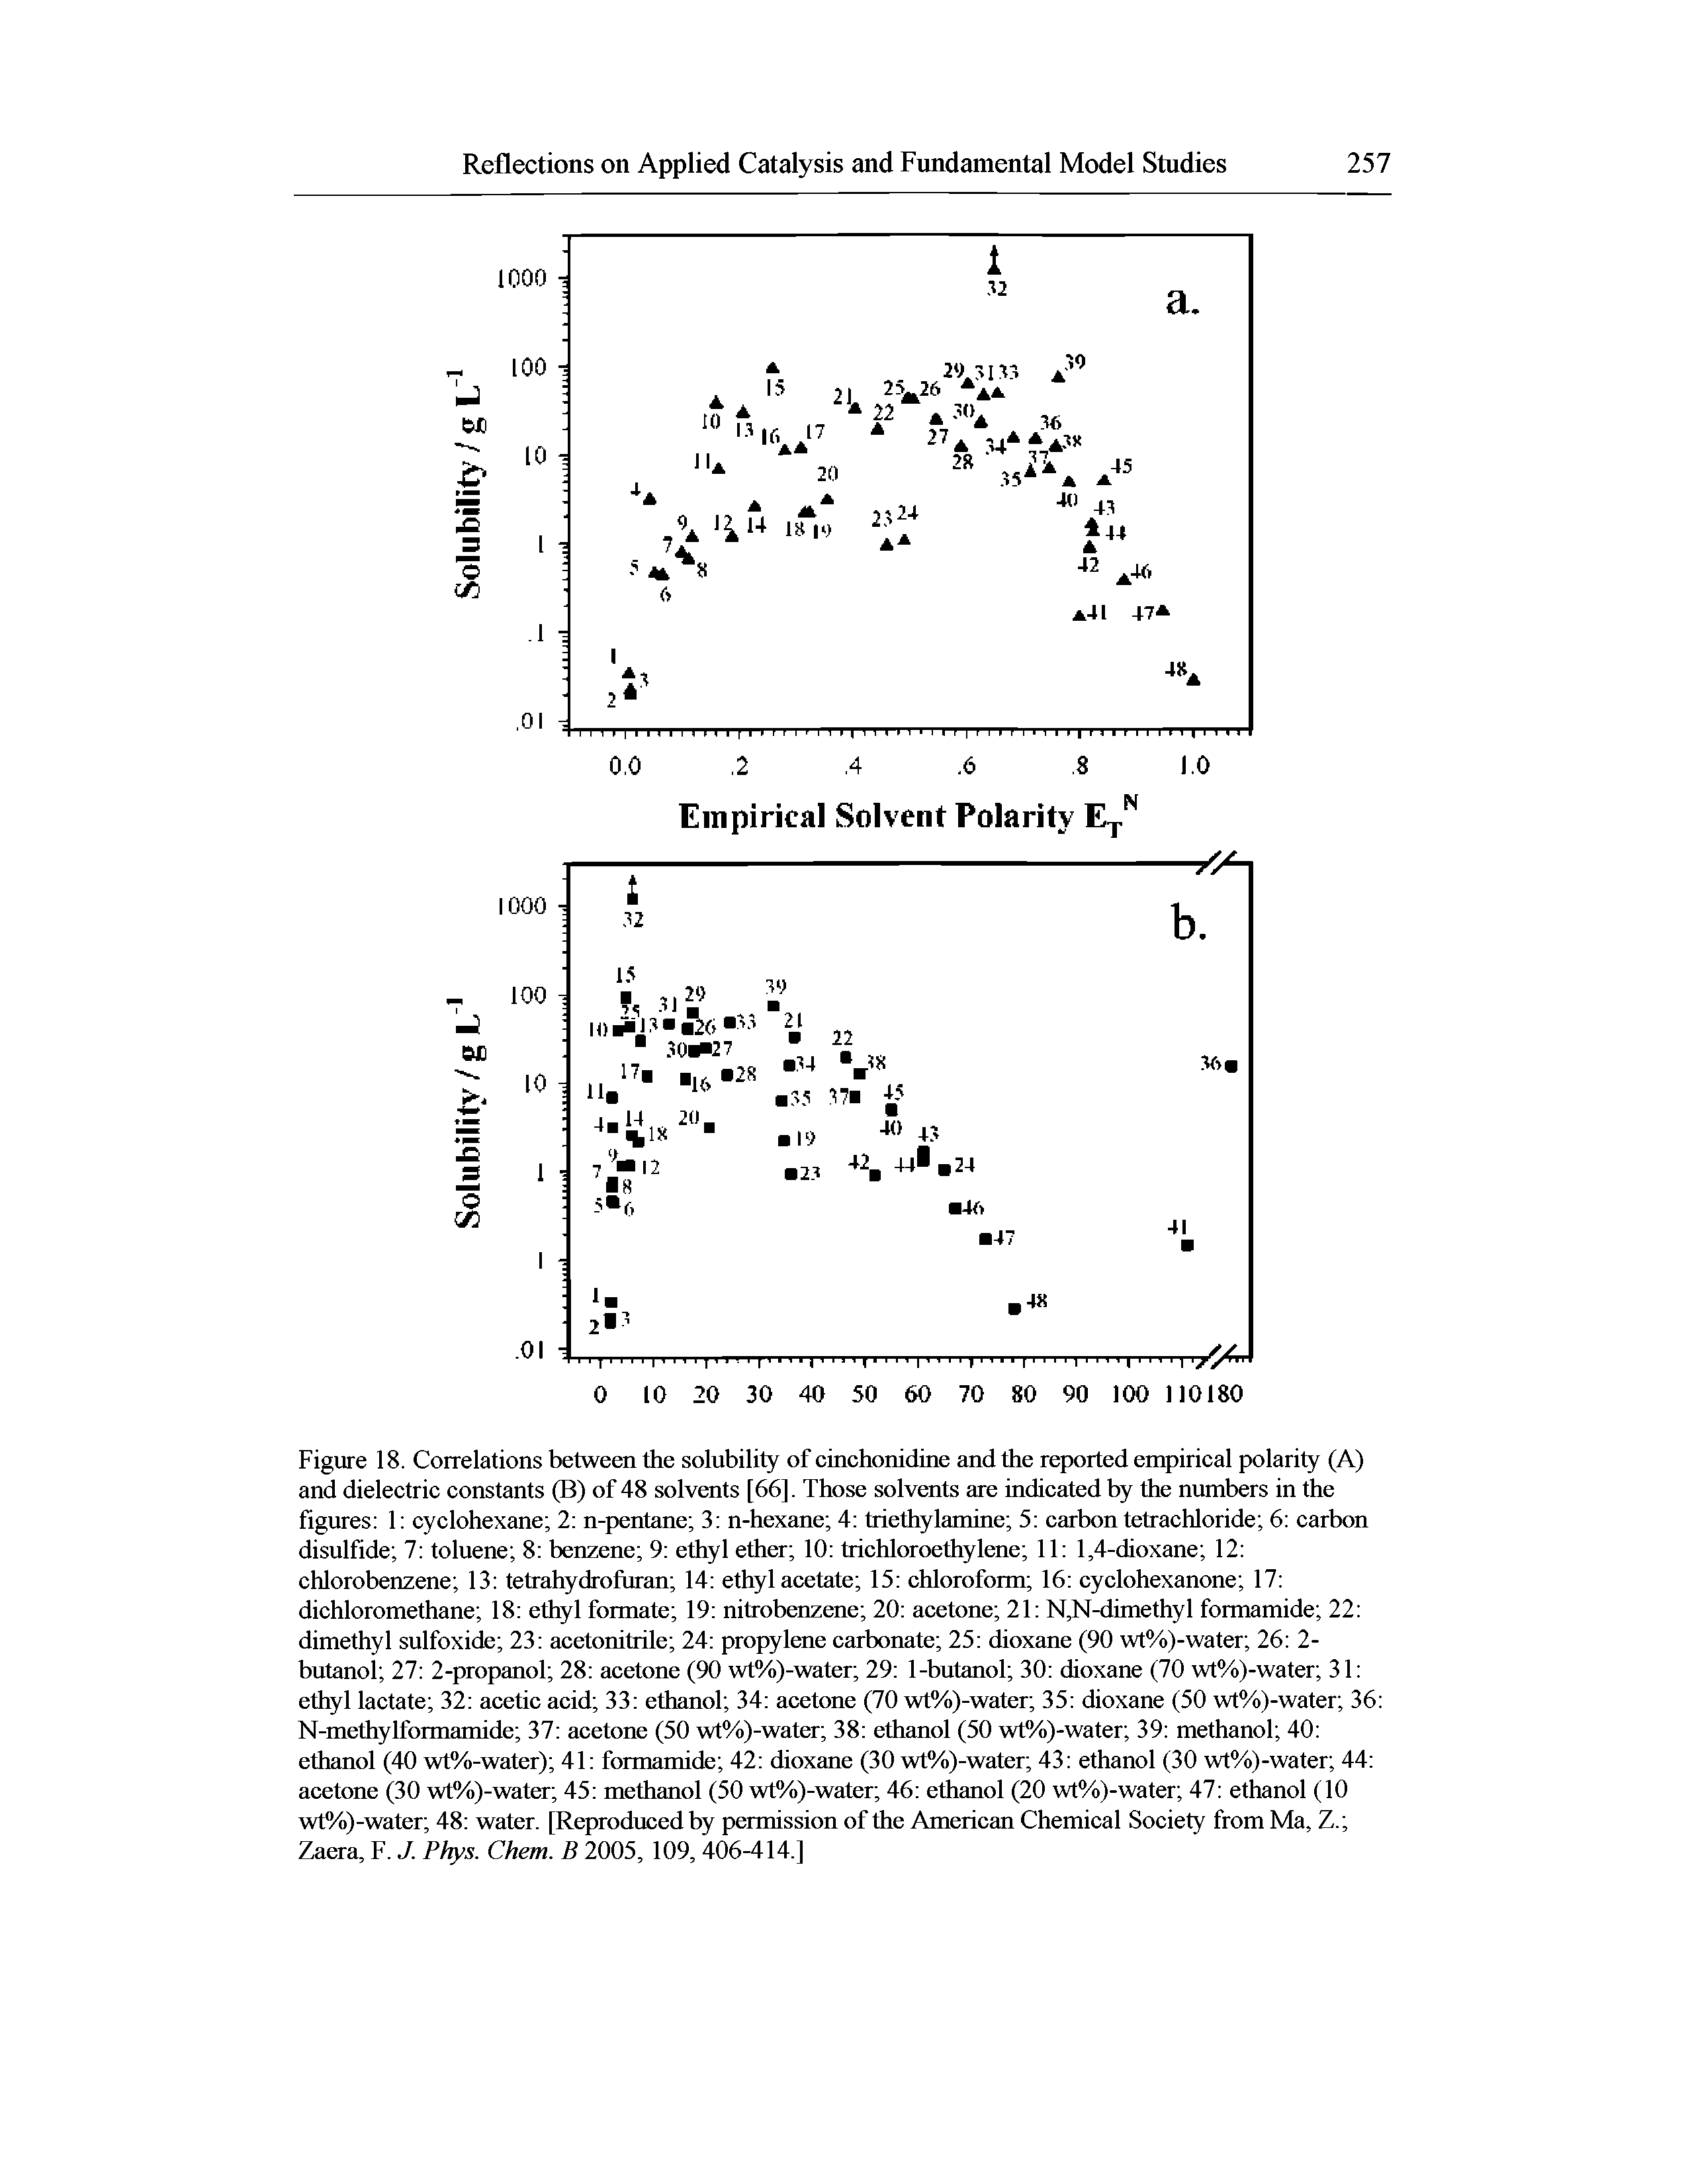 Figure 18. Correlations between the solubility of cmchonidme and the reported empirical polarity (A) and dielectric constants (B) of 48 solvents [66]. Those solvents are indicated by the numbers in the figures 1 cyclohexane 2 n-pentane 3 n-hexane 4 triethylamine 5 carbon tetrachloride 6 carbon disulfide 7 toluene 8 benzene 9 ethyl ether 10 trichloroethylene 11 1,4-dioxane 12 chlorobenzene 13 tetrahydrofuran 14 ethyl acetate 15 chloroform 16 cyclohexanone 17 dichloromethane 18 ethyl formate 19 nitrobenzene 20 acetone 21 N,N-drmethyl formamide 22 dimethyl sulfoxide 23 acetonitrile 24 propylene carbonate 25 dioxane (90 wt%)-water 26 2-butanol 27 2-propanol 28 acetone (90 wt%)-water 29 1-butanol 30 dioxane (70 wt%)-water 31 ethyl lactate 32 acetic acid 33 ethanol 34 acetone (70 wt%)-water 35 dioxane (50 wt%)-water 36 N-methylformamide 37 acetone (50 wt%)-water 38 ethanol (50 wt%)-water 39 methanol 40 ethanol (40 wt%-water) 41 formamide 42 dioxane (30 wt%)-water 43 ethanol (30 wt%)-water 44 acetone (30 wt%)-water 45 methanol (50 wt%)-water 46 ethanol (20 wt%)-water 47 ethanol (10 wt%)-water 48 water. [Reproduced by permission of the American Chemical Society from Ma, Z. Zaera, F. J. Phys. Chem. B 2005, 109, 406-414.]...